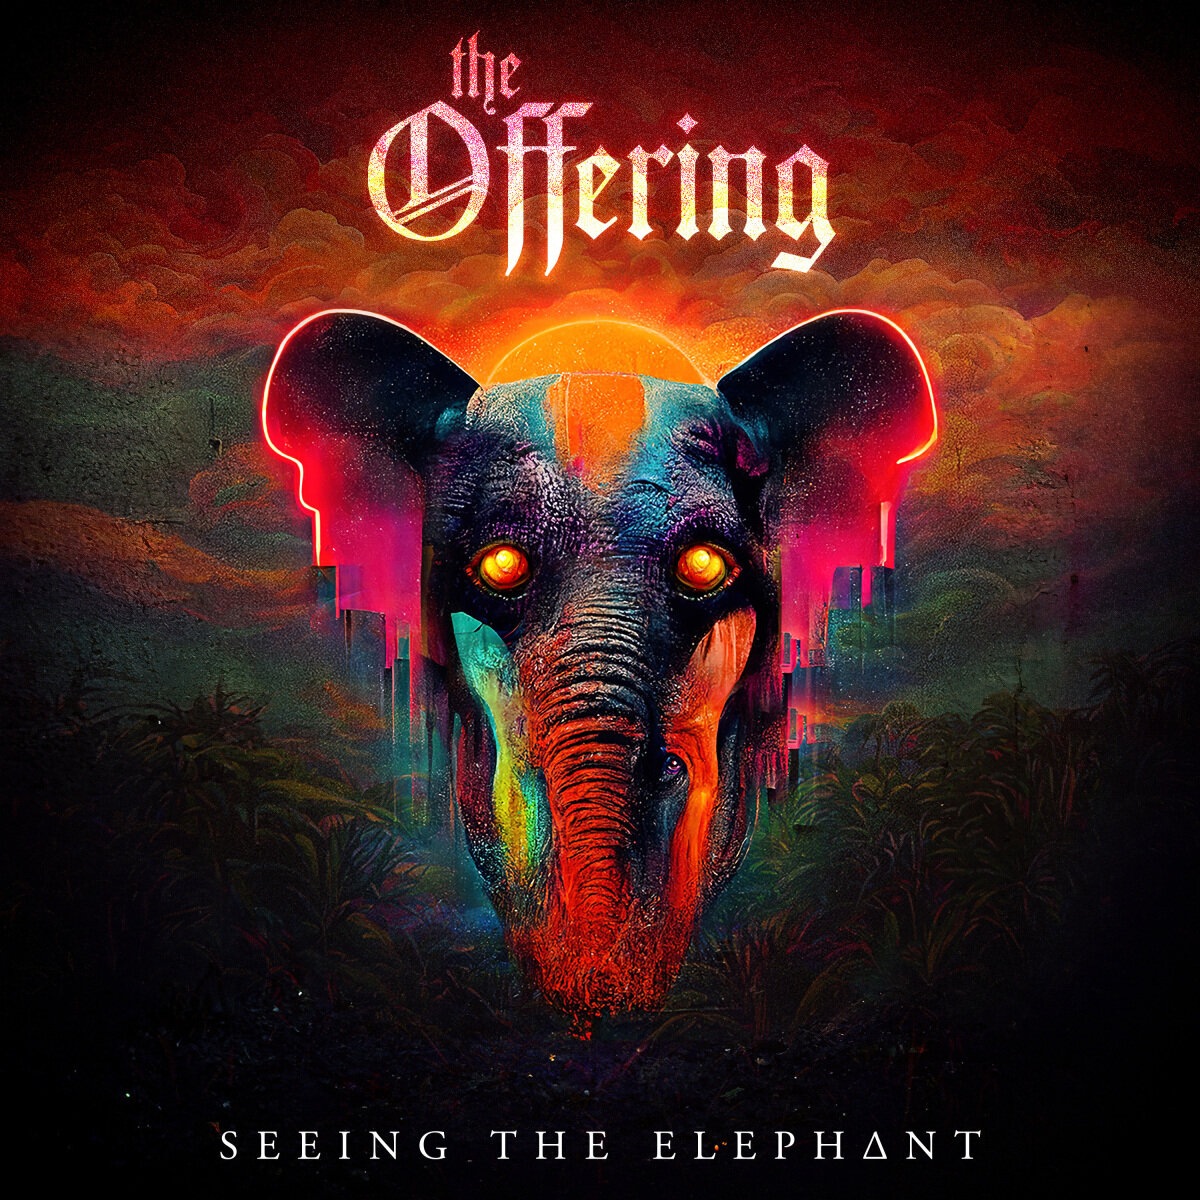 [Metal] Playlist - Page 6 Seeing-The-Elephant-The-Offering